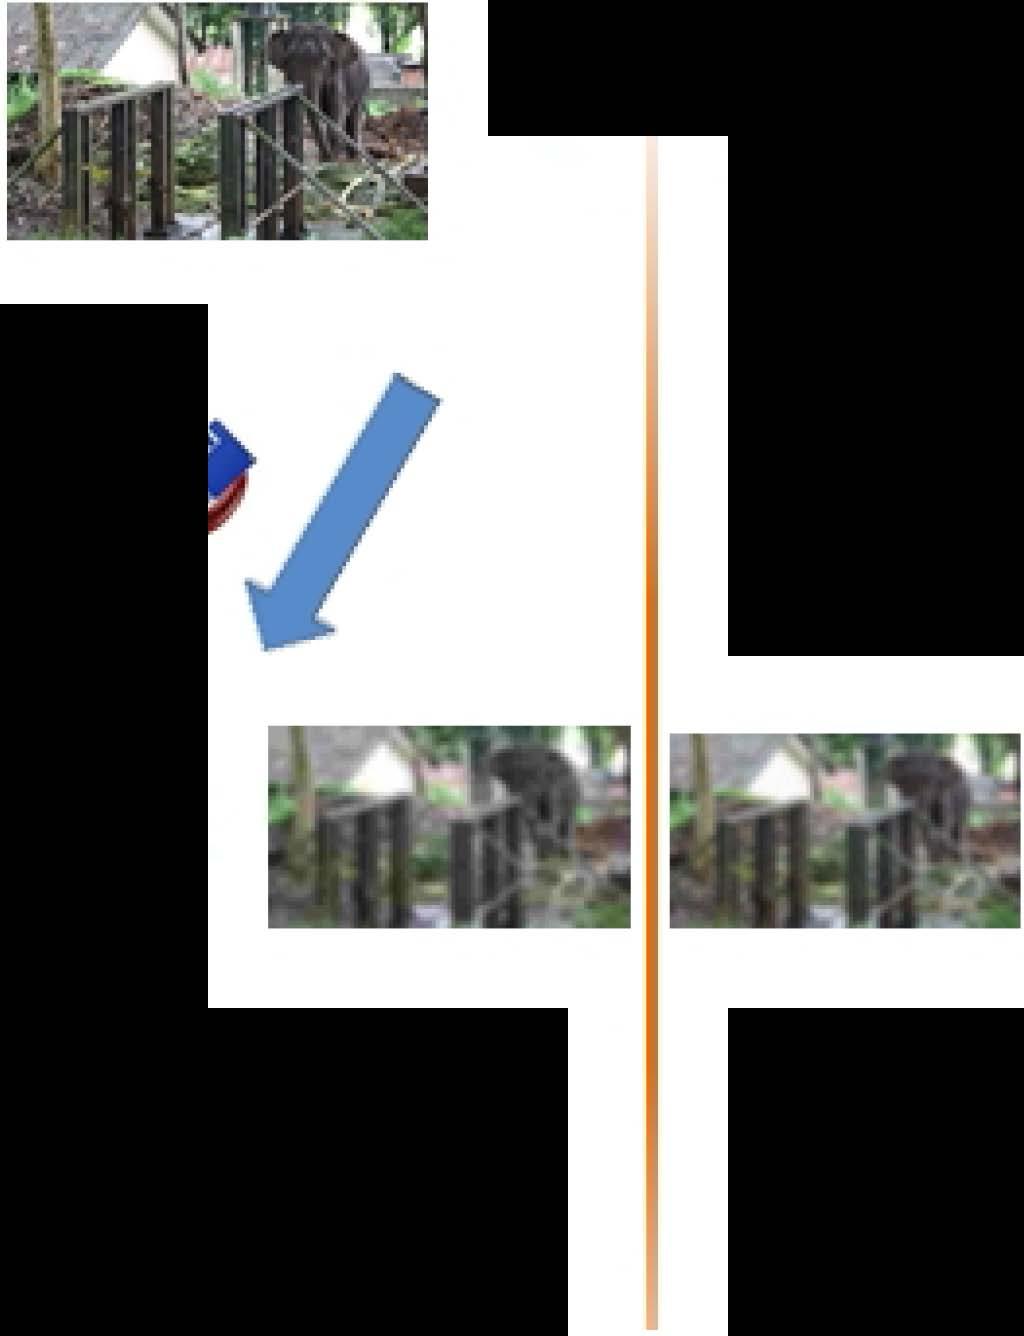 Blur followed by JPEG: Each of the four blurred images was compressed using the JPEG encoder bank.